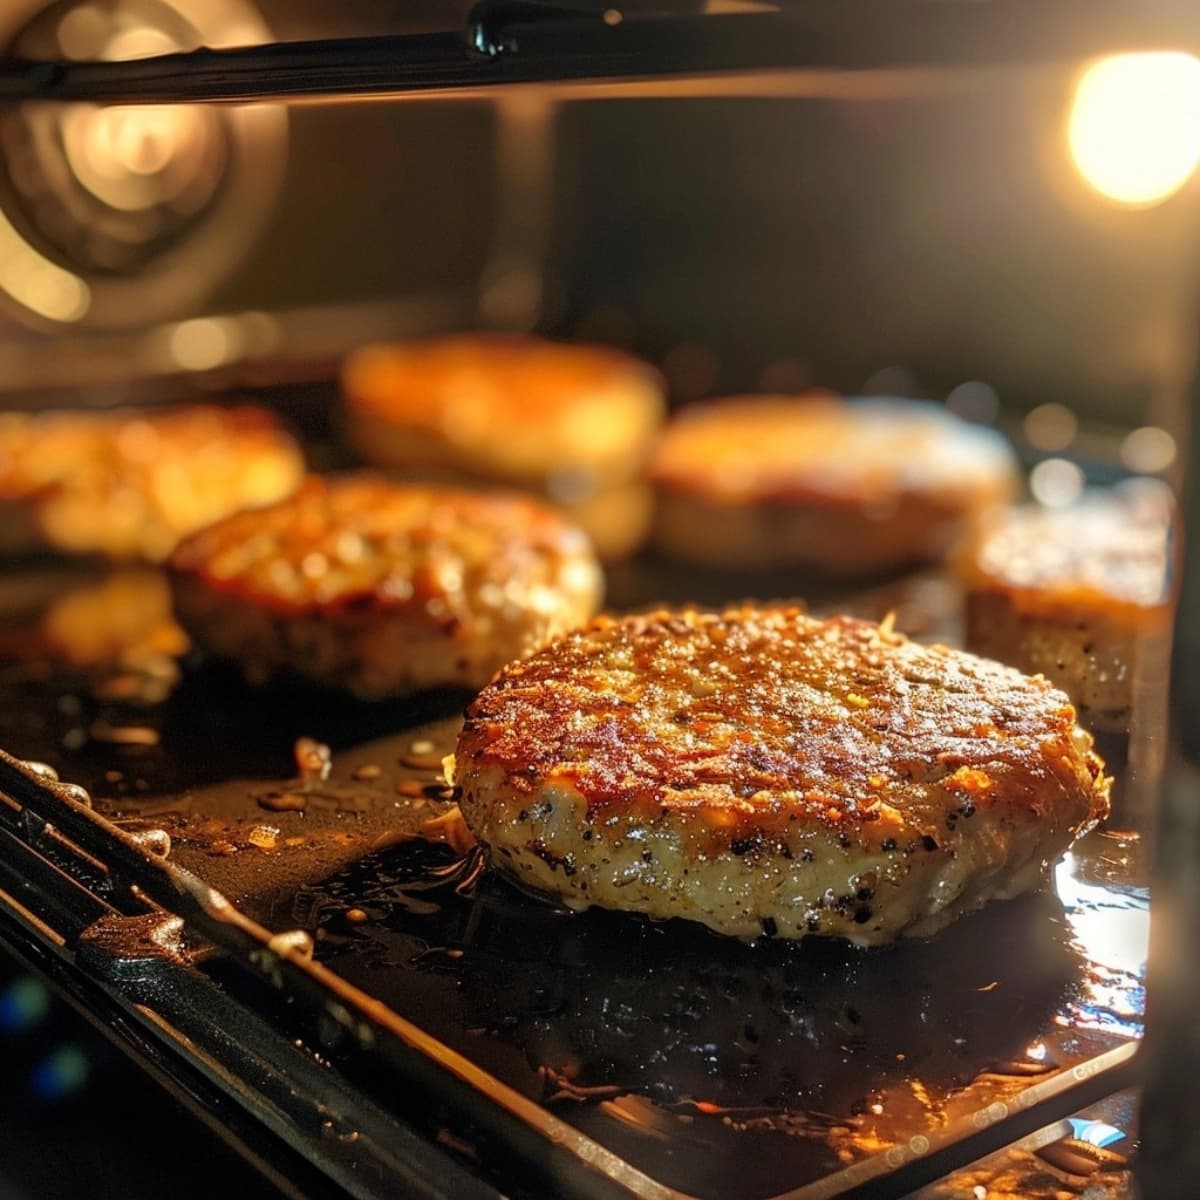 Beef patties baked inside and oven.